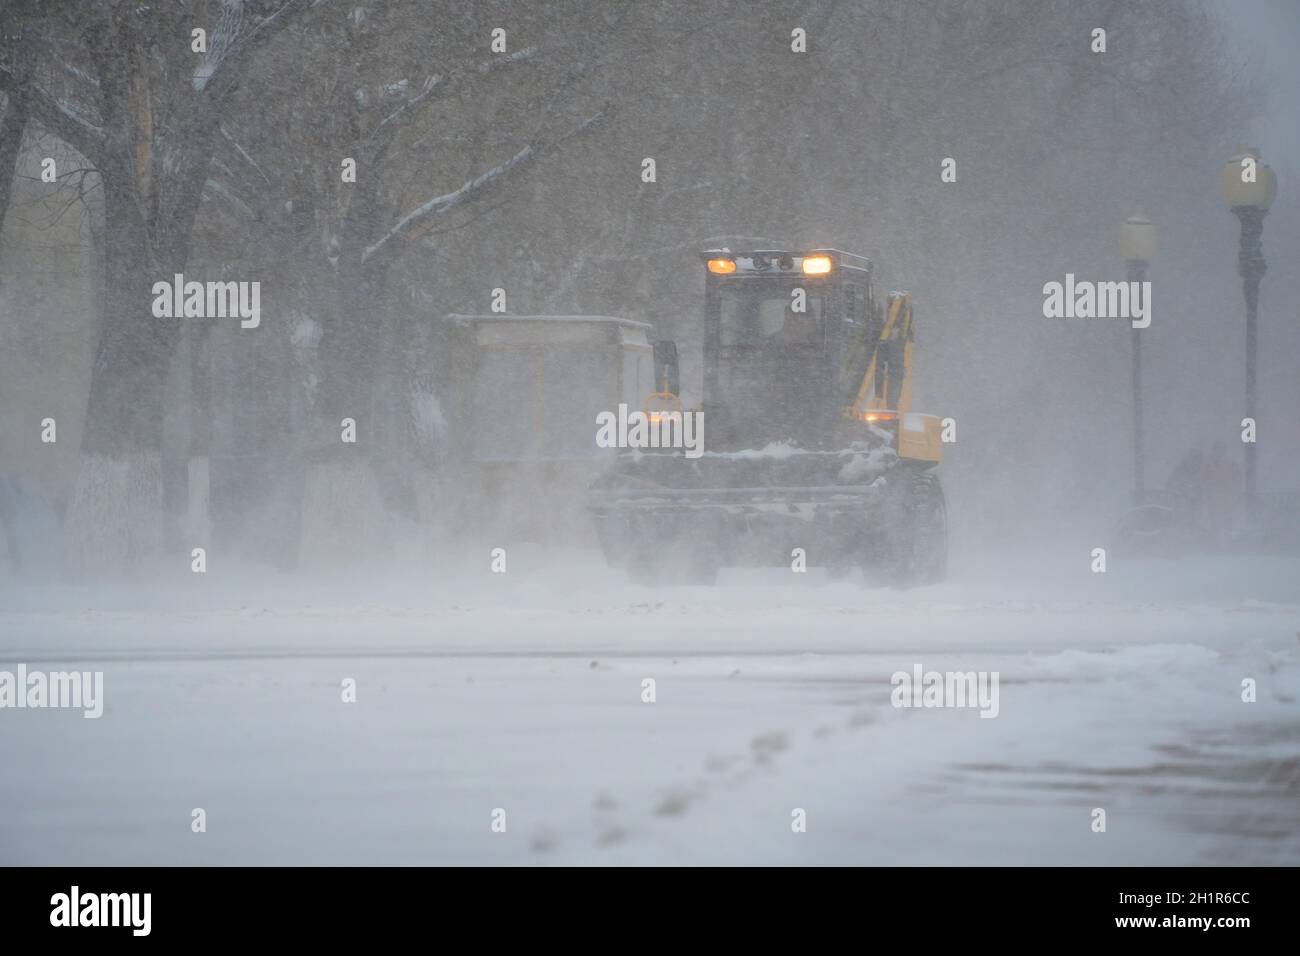 Snow removal equipment, utilities and municipal services are clearing the snow from the streets in the snow storm,Blizzard and snowstorm.Weather condi Stock Photo